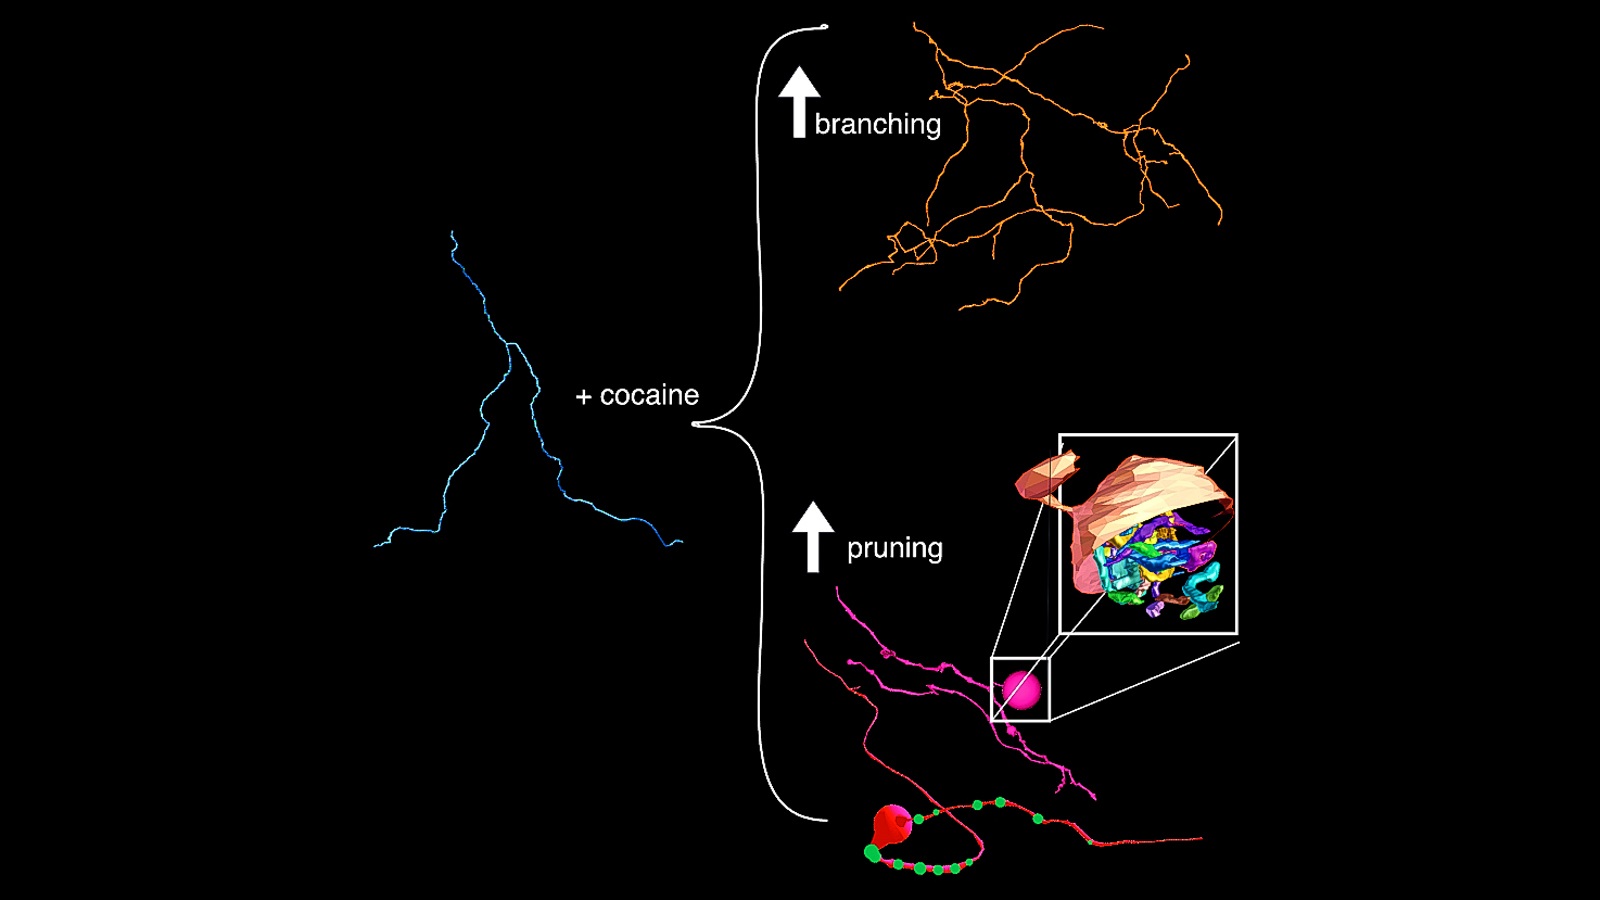 A connectomic analysis of the brains of mice treated with cocaine shows that dopamine axons undergo two major anatomical remodeling events: 1) axons increase the average number of branches they make (top image), 2) while simultaneously pruning, or removing, existing axons.